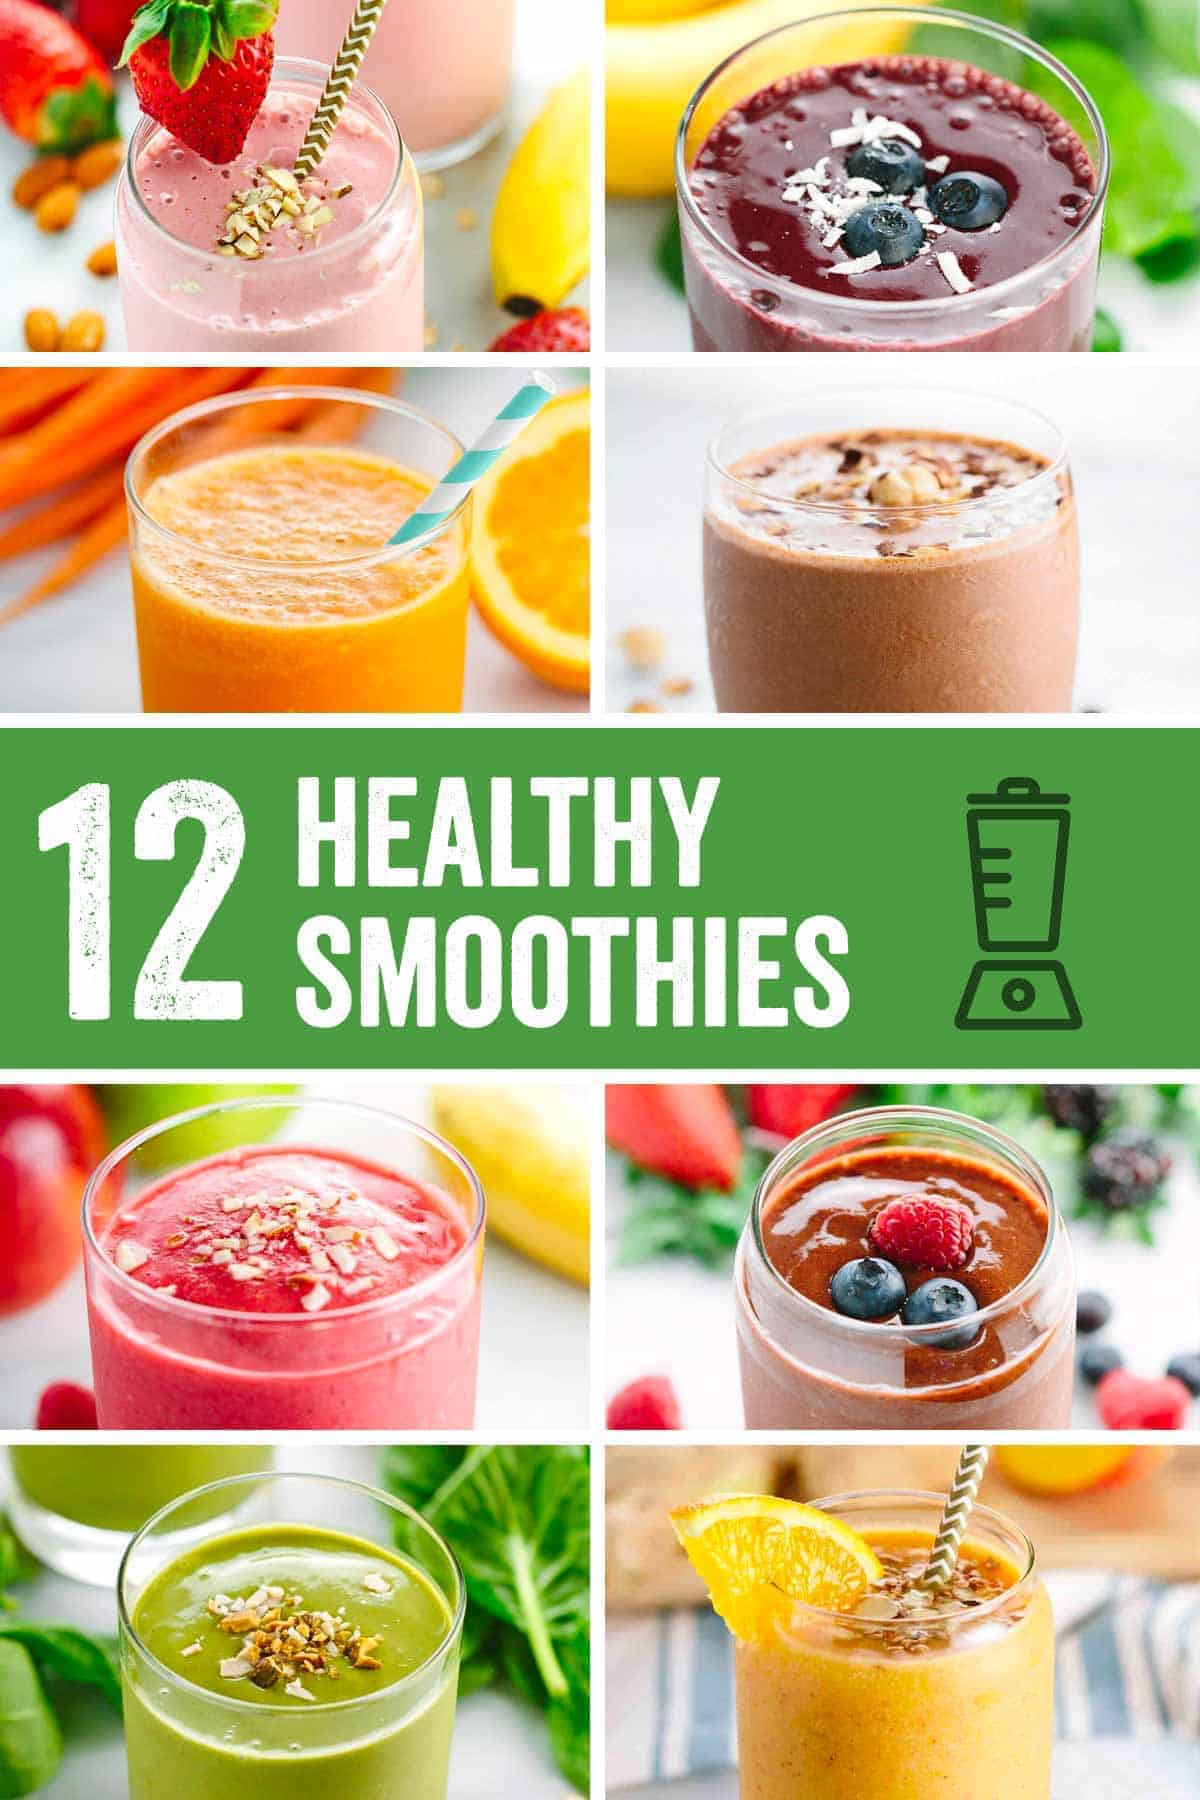 Simple Healthy Smoothie Recipes
 Roundup Easy Five Minute Healthy Smoothie Recipes